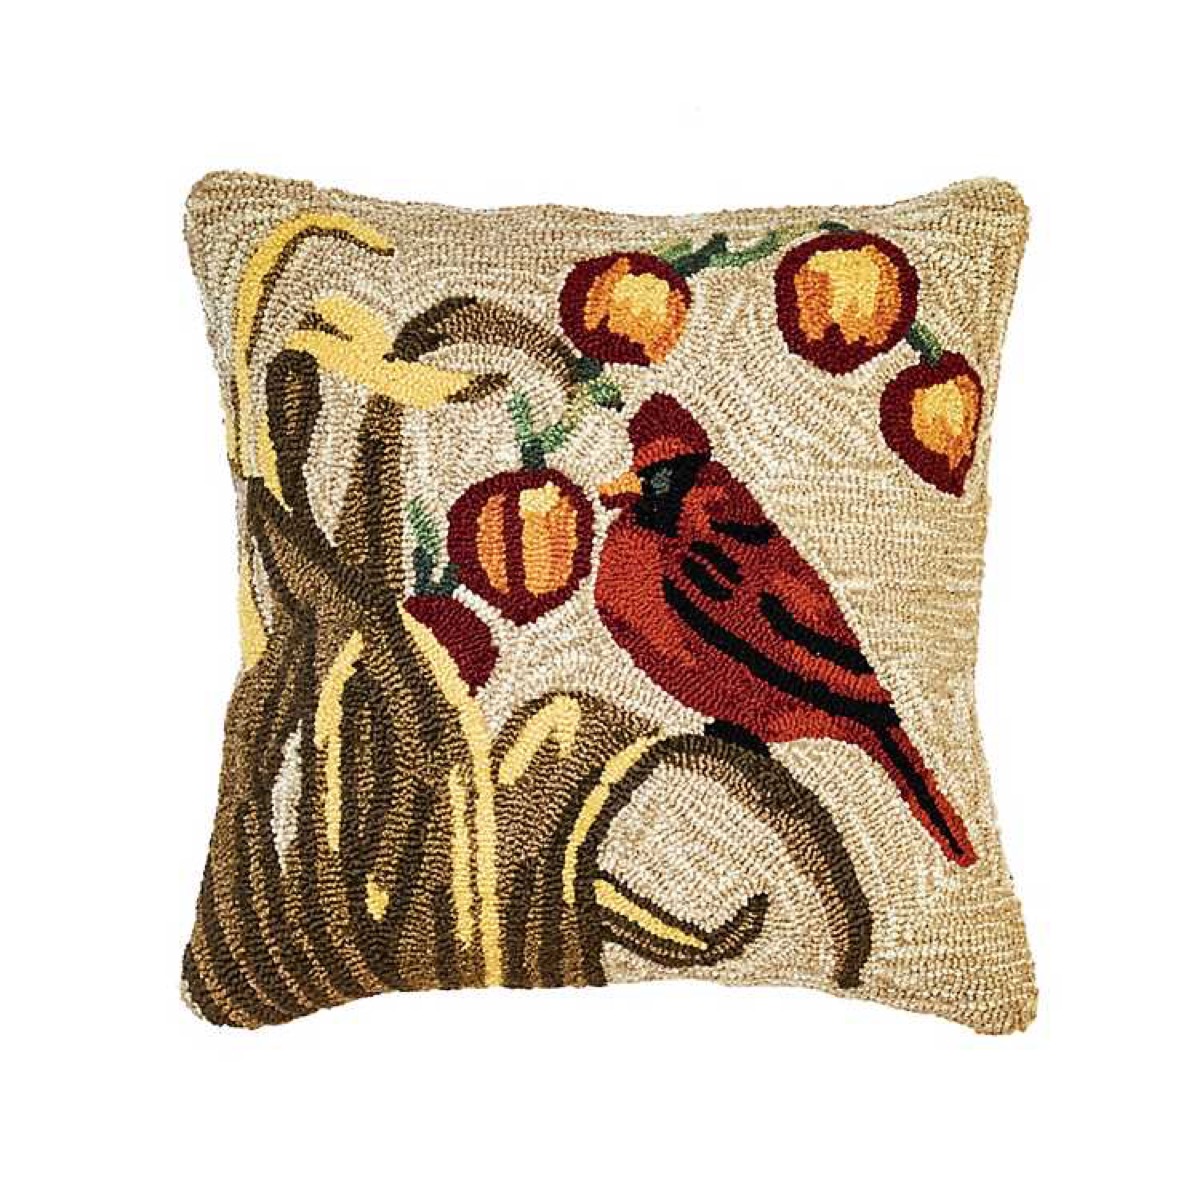 needlepoint pillow with cardinal on it, fall decoration tips